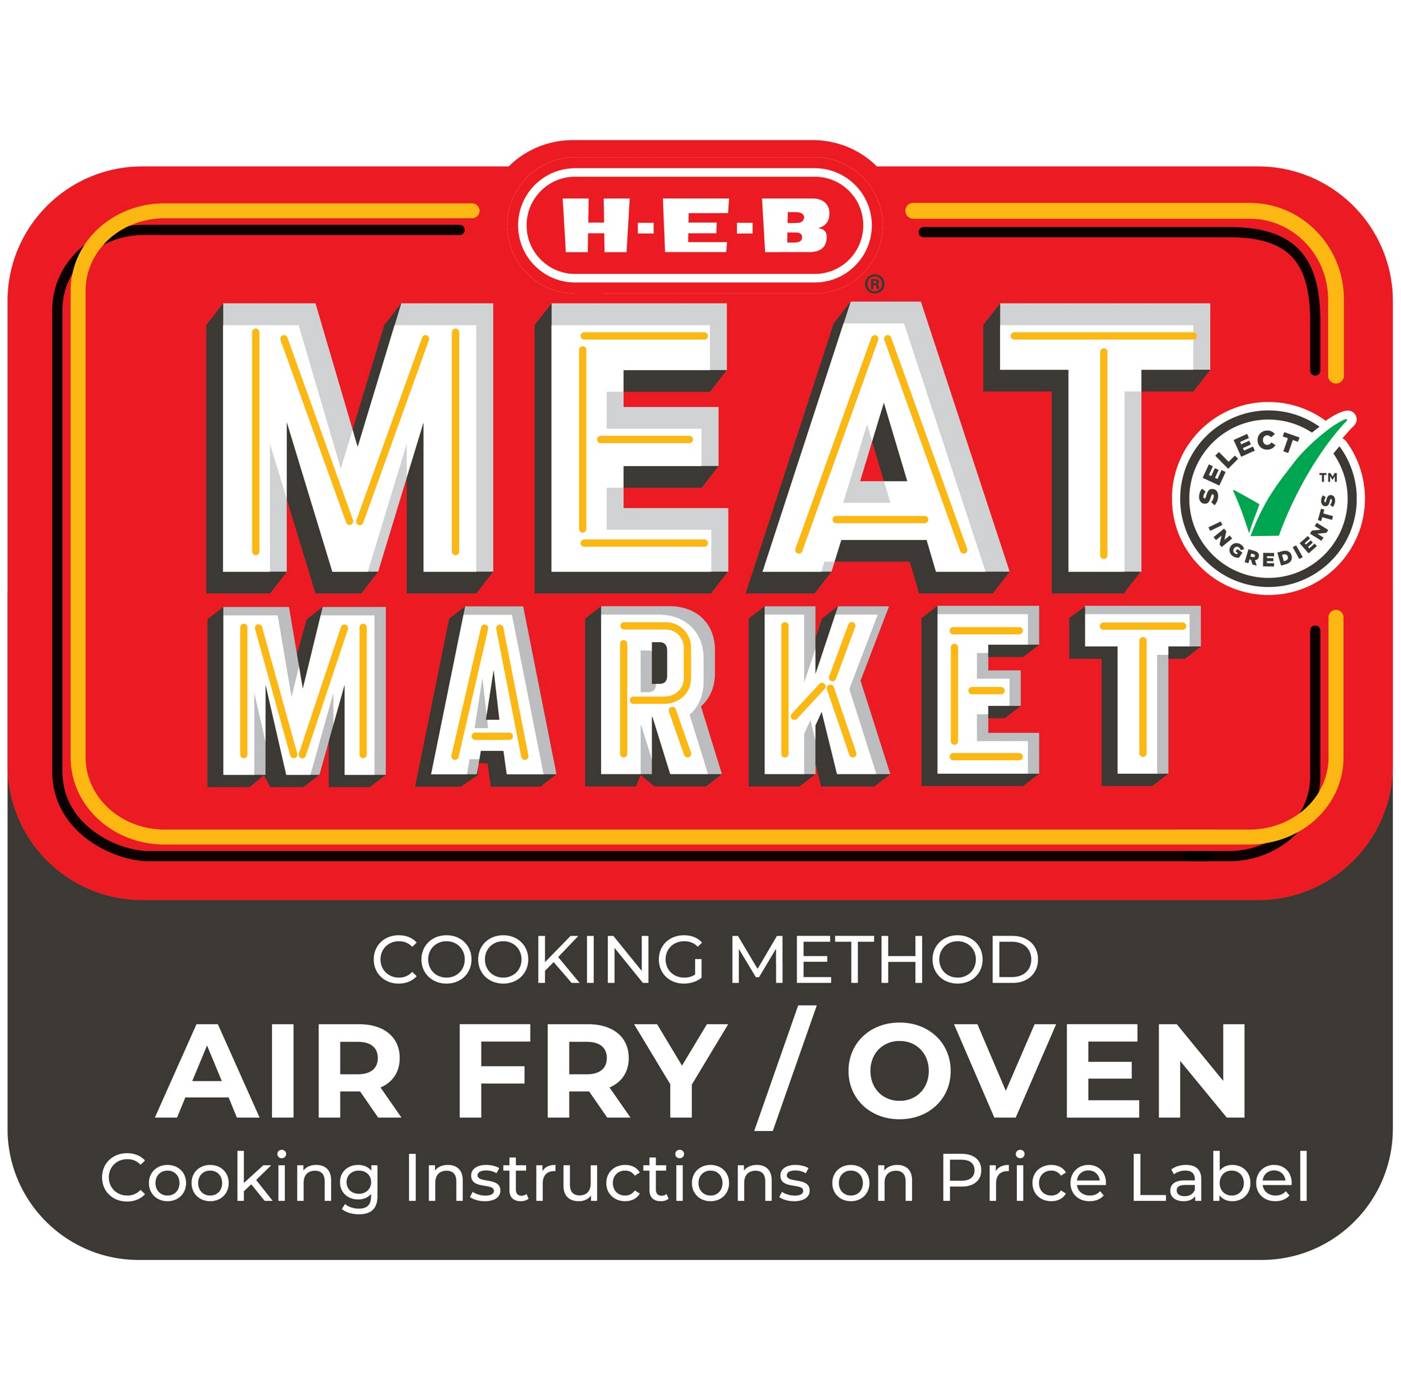 H-E-B Meat Market Marinated Chicken Wings – Smoky BBQ; image 3 of 3